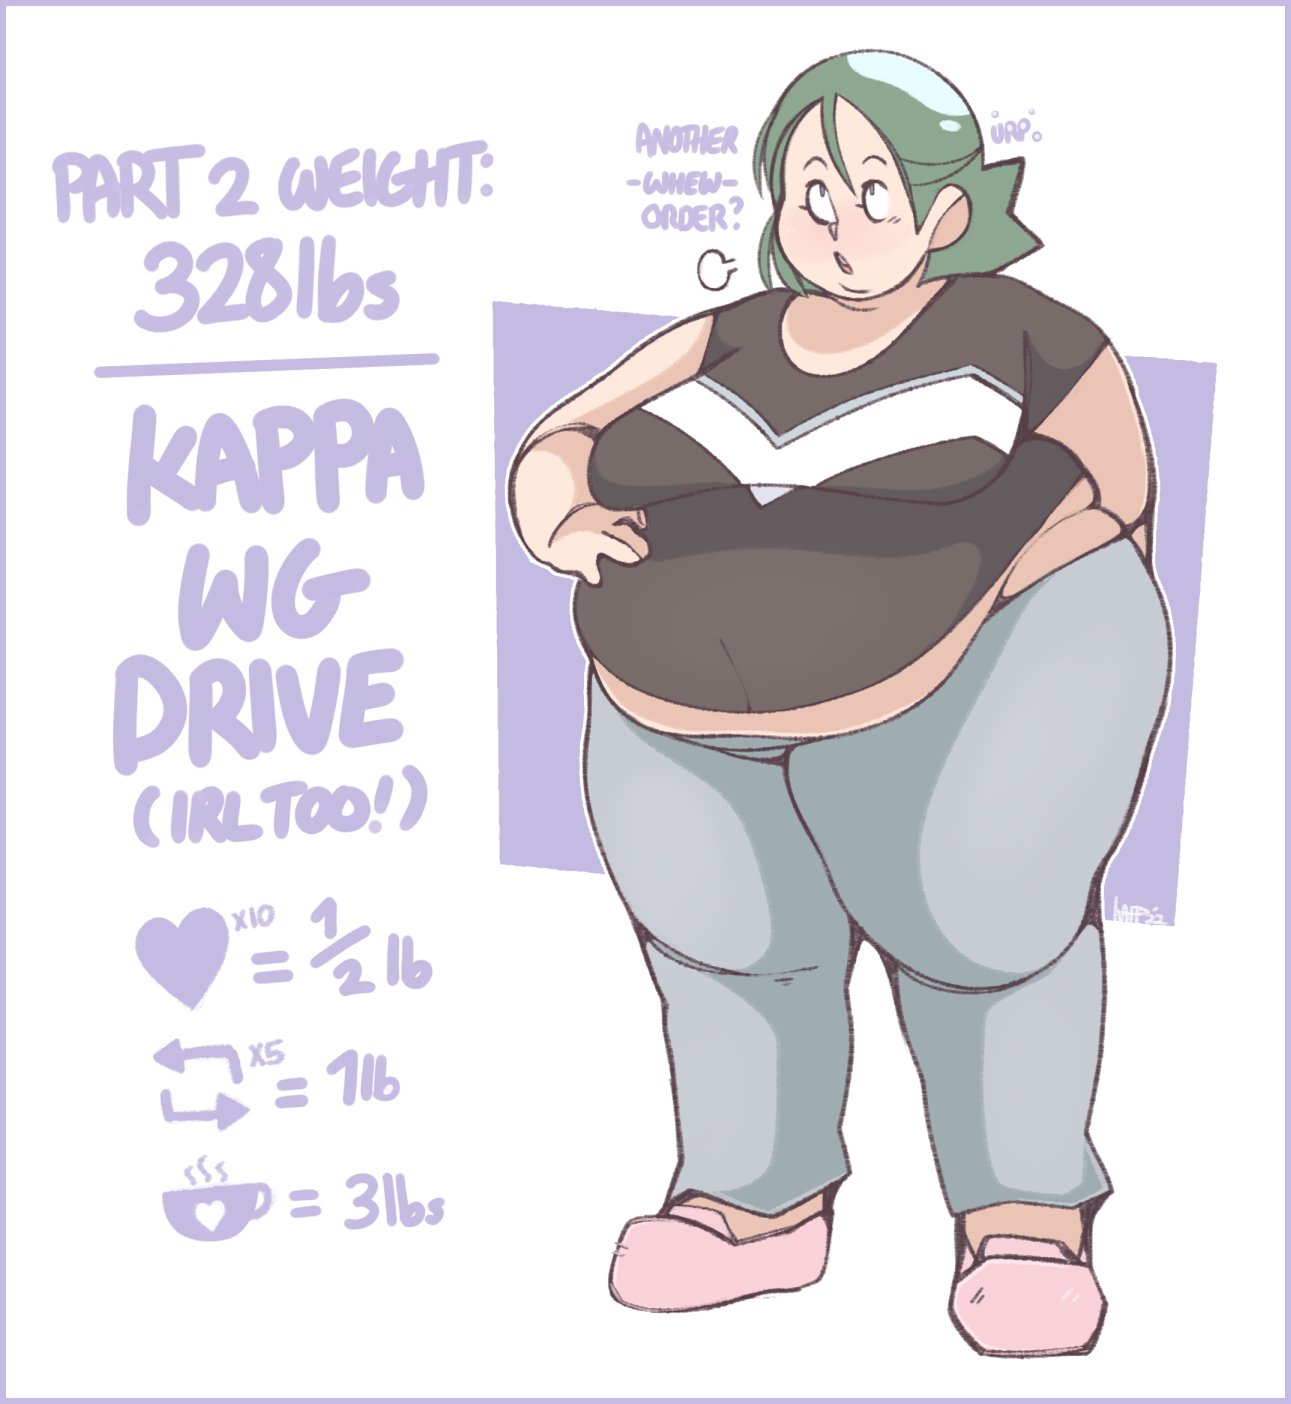 Kapptastic on Twitter: "Looks like certain Kappa has been eatin' good! Starting at 328 lbs, Round 2 is open until 9/12, Midnight EST! Half of all Kofis go right to the "